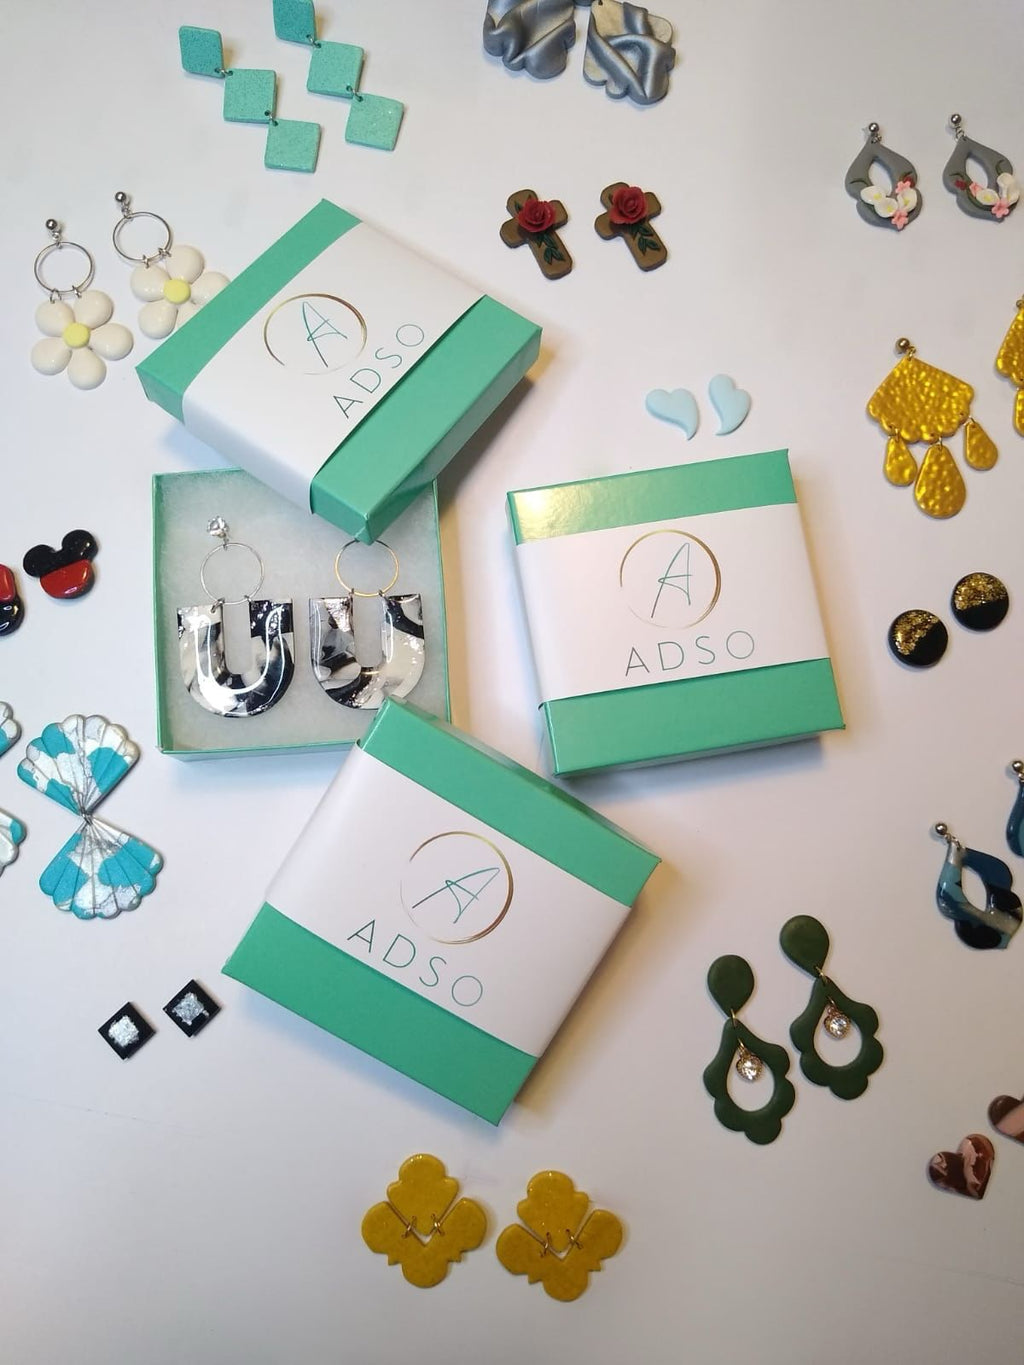 Monthly Handmade Jewelry Subscription Box - ADSO Creations